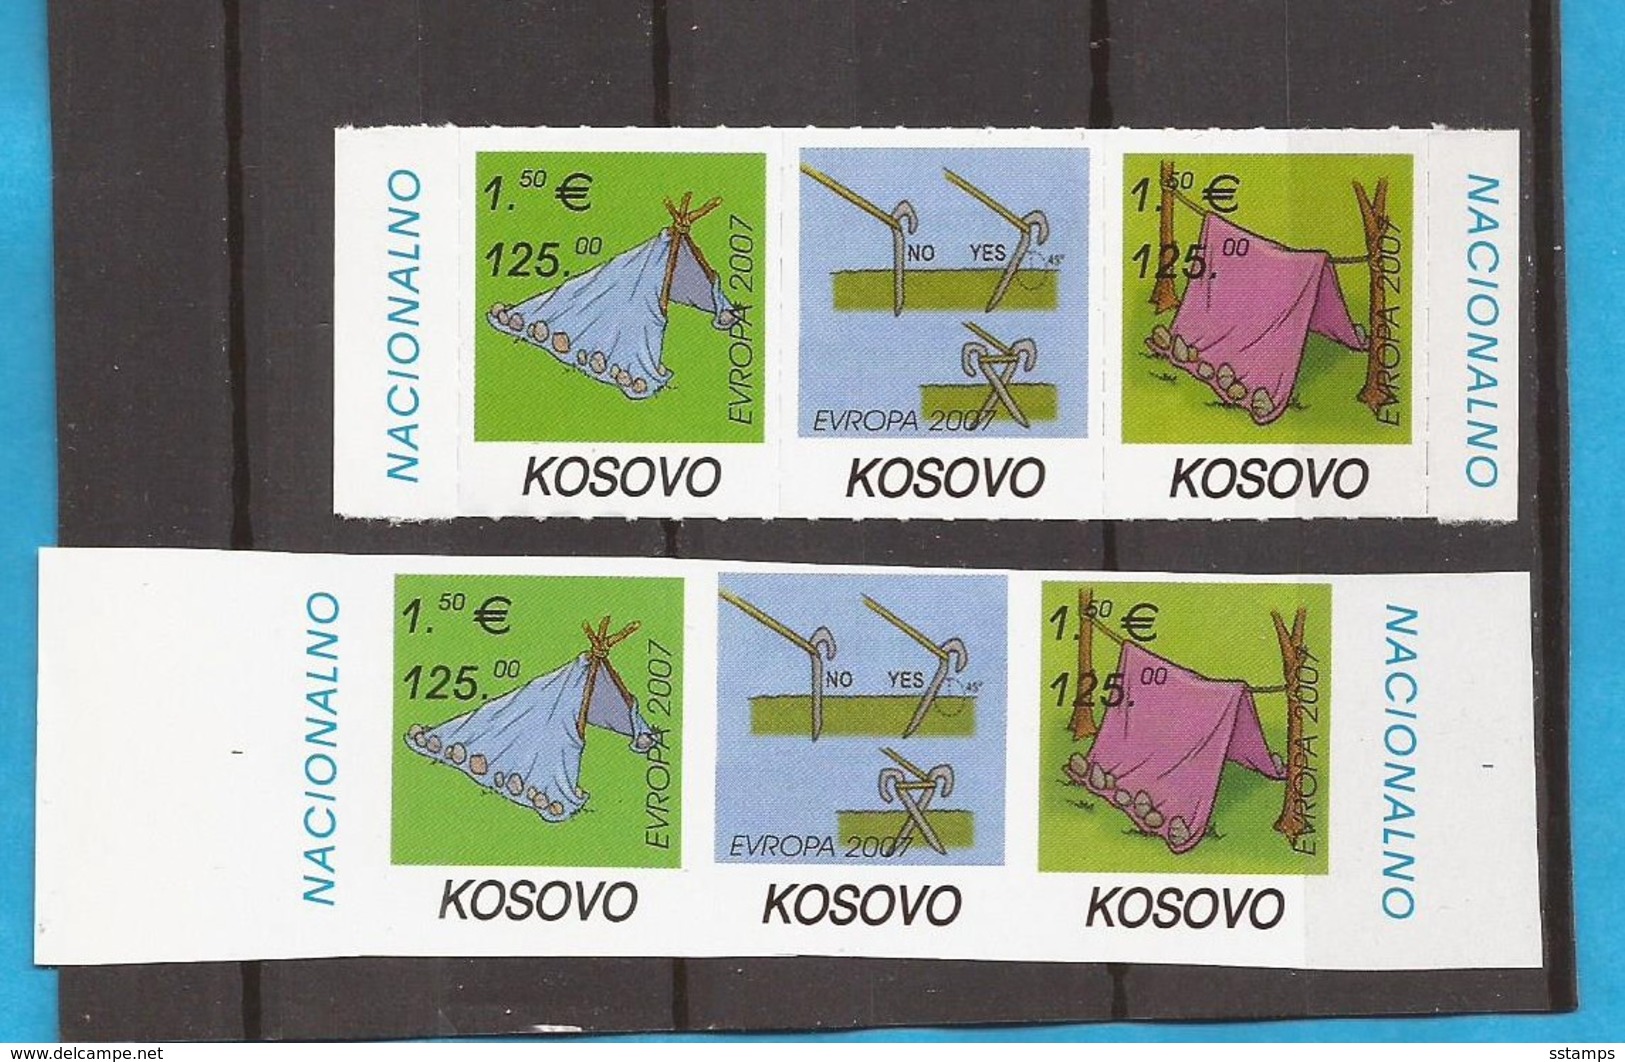 2007  SCOUTS  PFADFINDER    EUROPA CEPT  KOSOVO  SPETIAL OFFER LUX  PERFORATE-RR IMPERFORATE RRR MNH - Kosovo